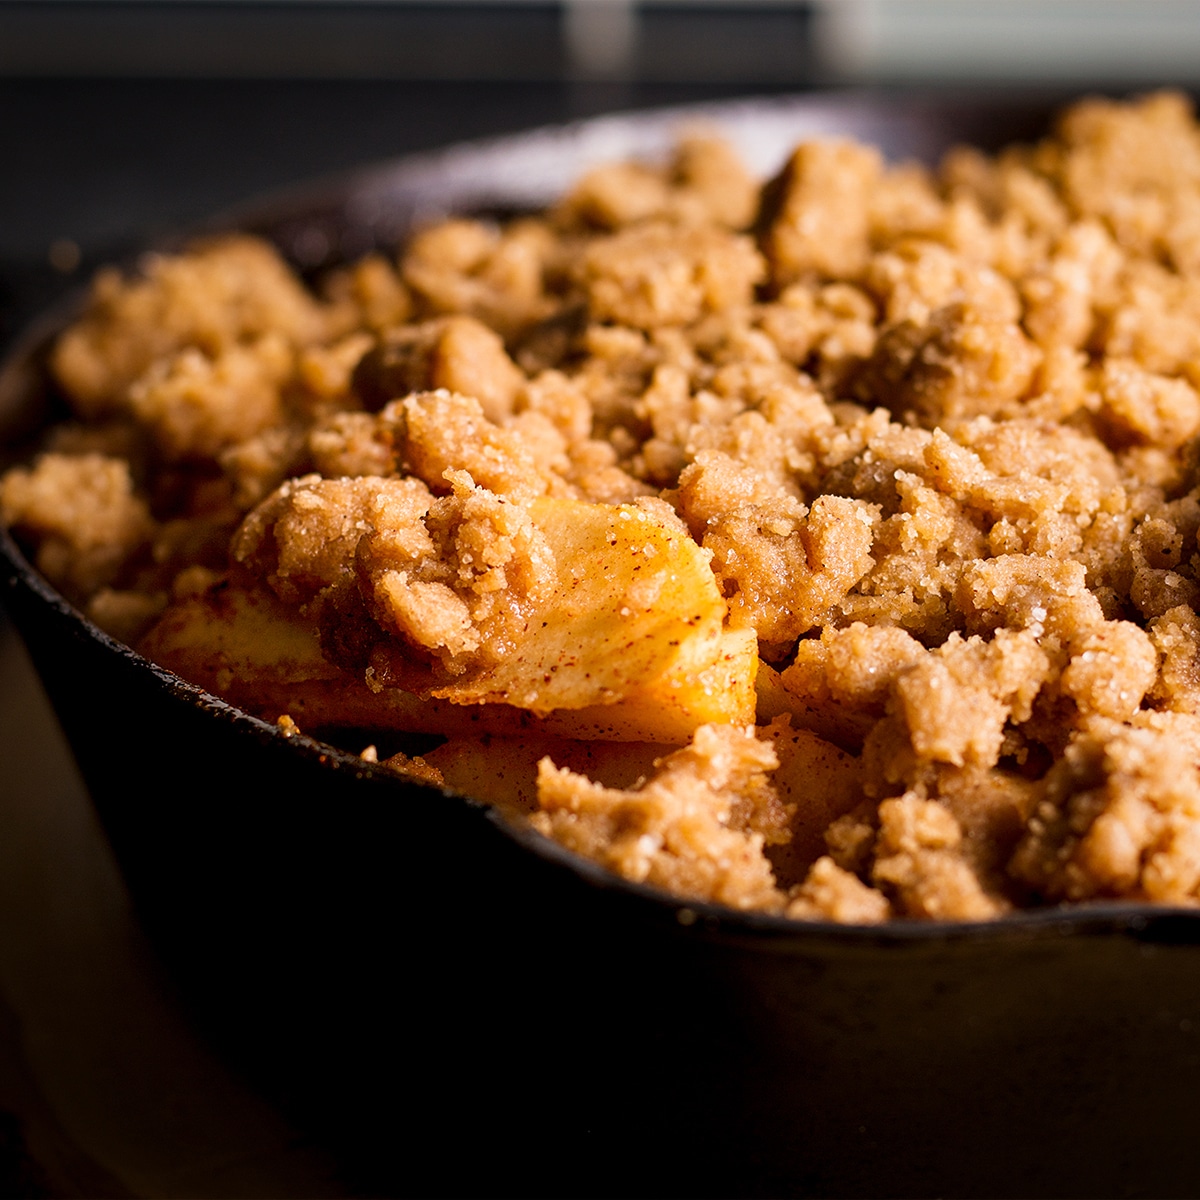 Someone lifting a spoonful of apple cobbler from a cast iron skillet.